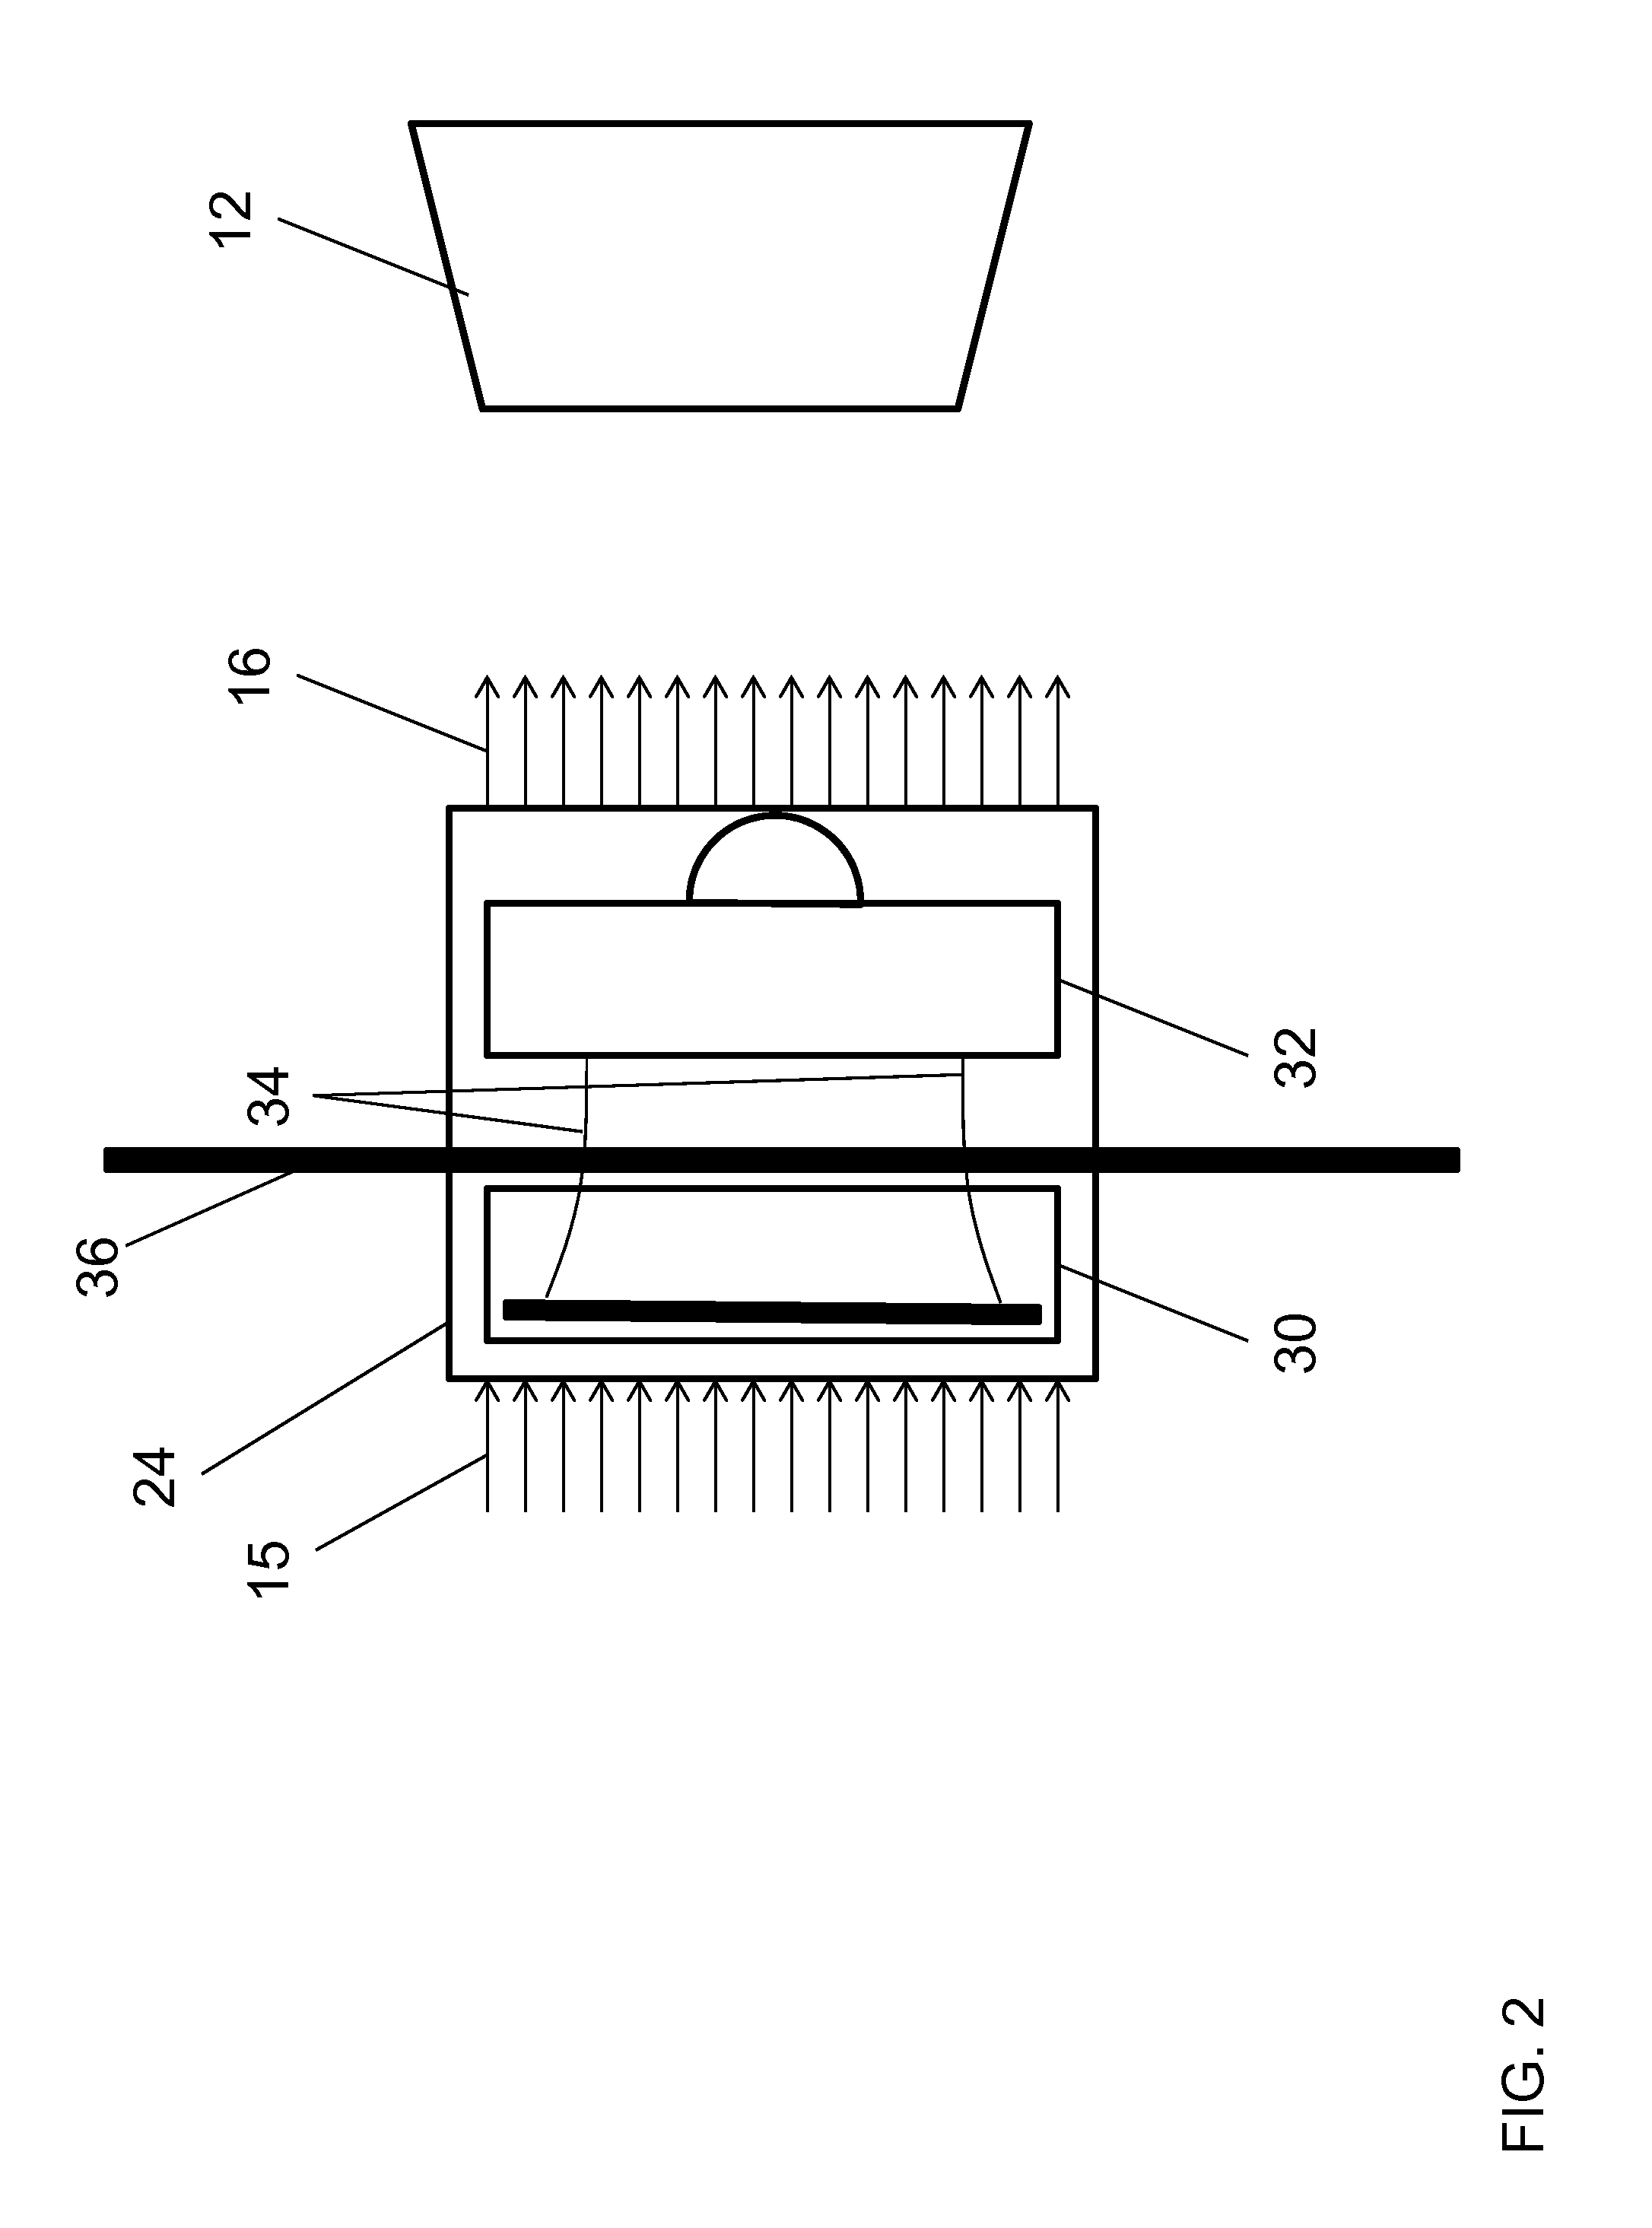 System for detecting uv-fluorescent indica with a camera